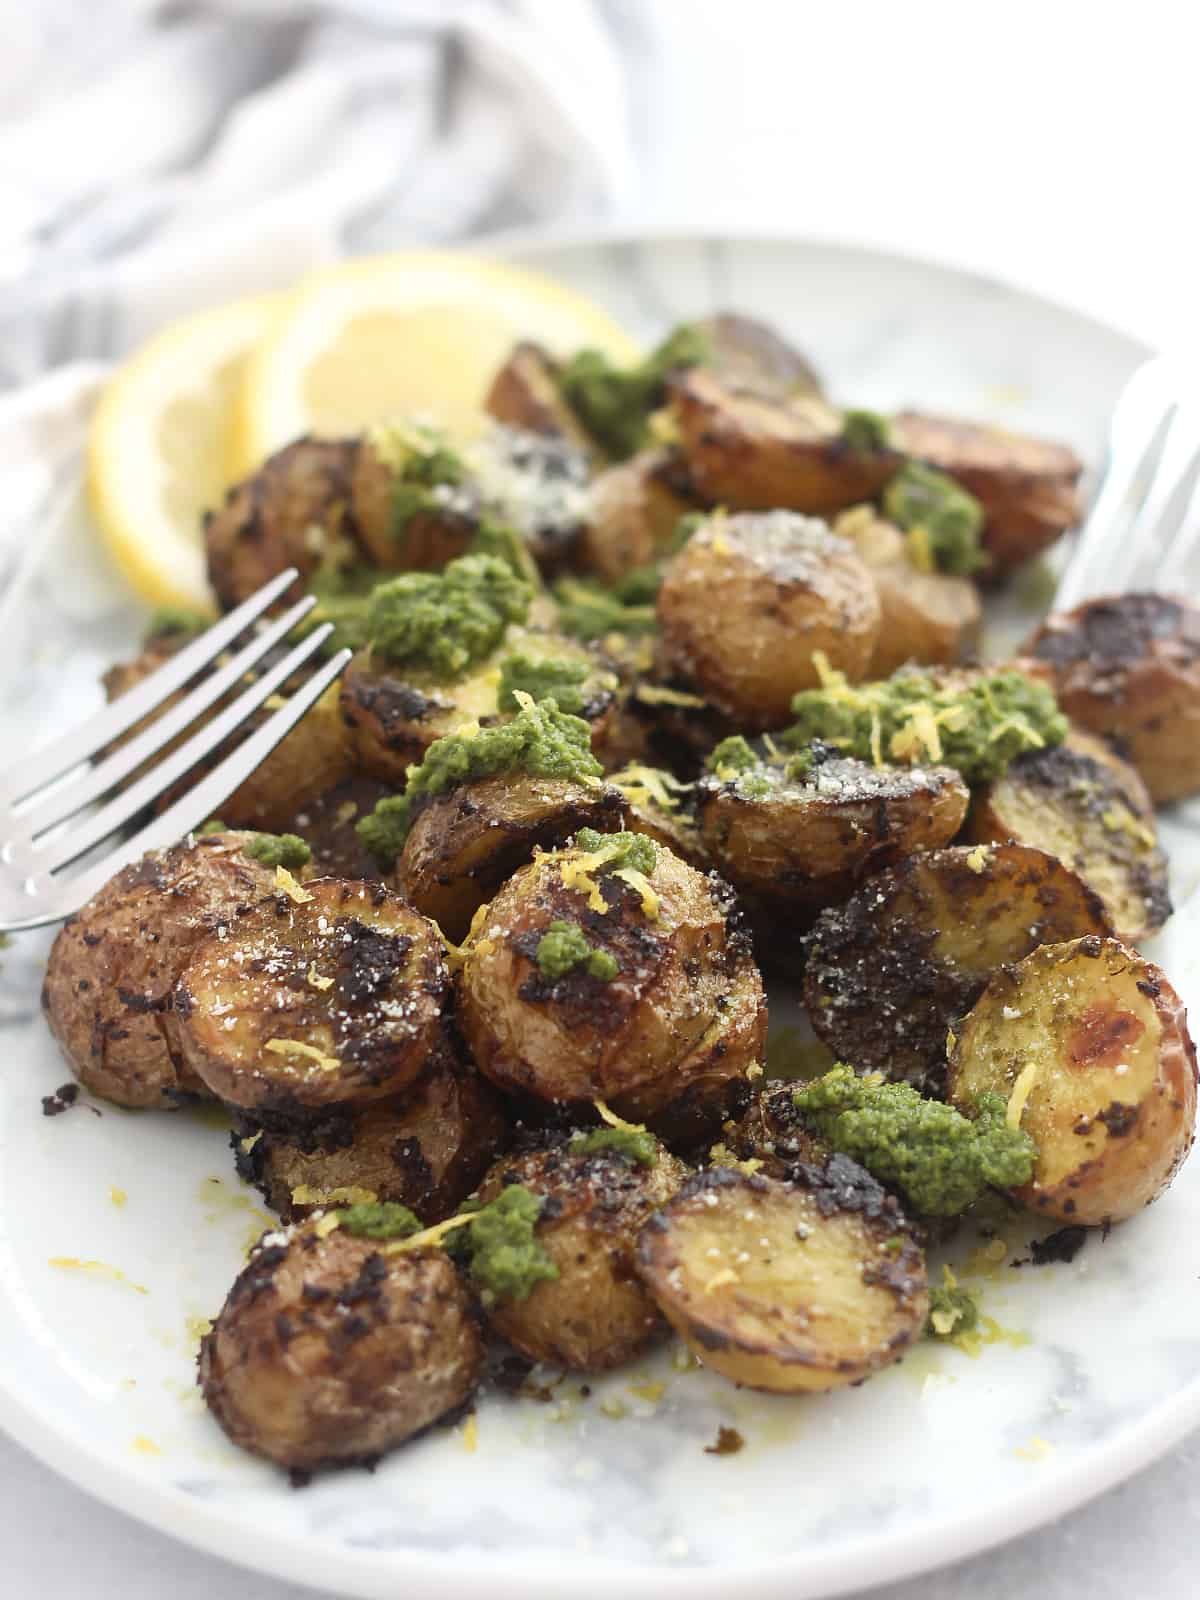 Halved roasted baby potatoes topped with fresh pesto.